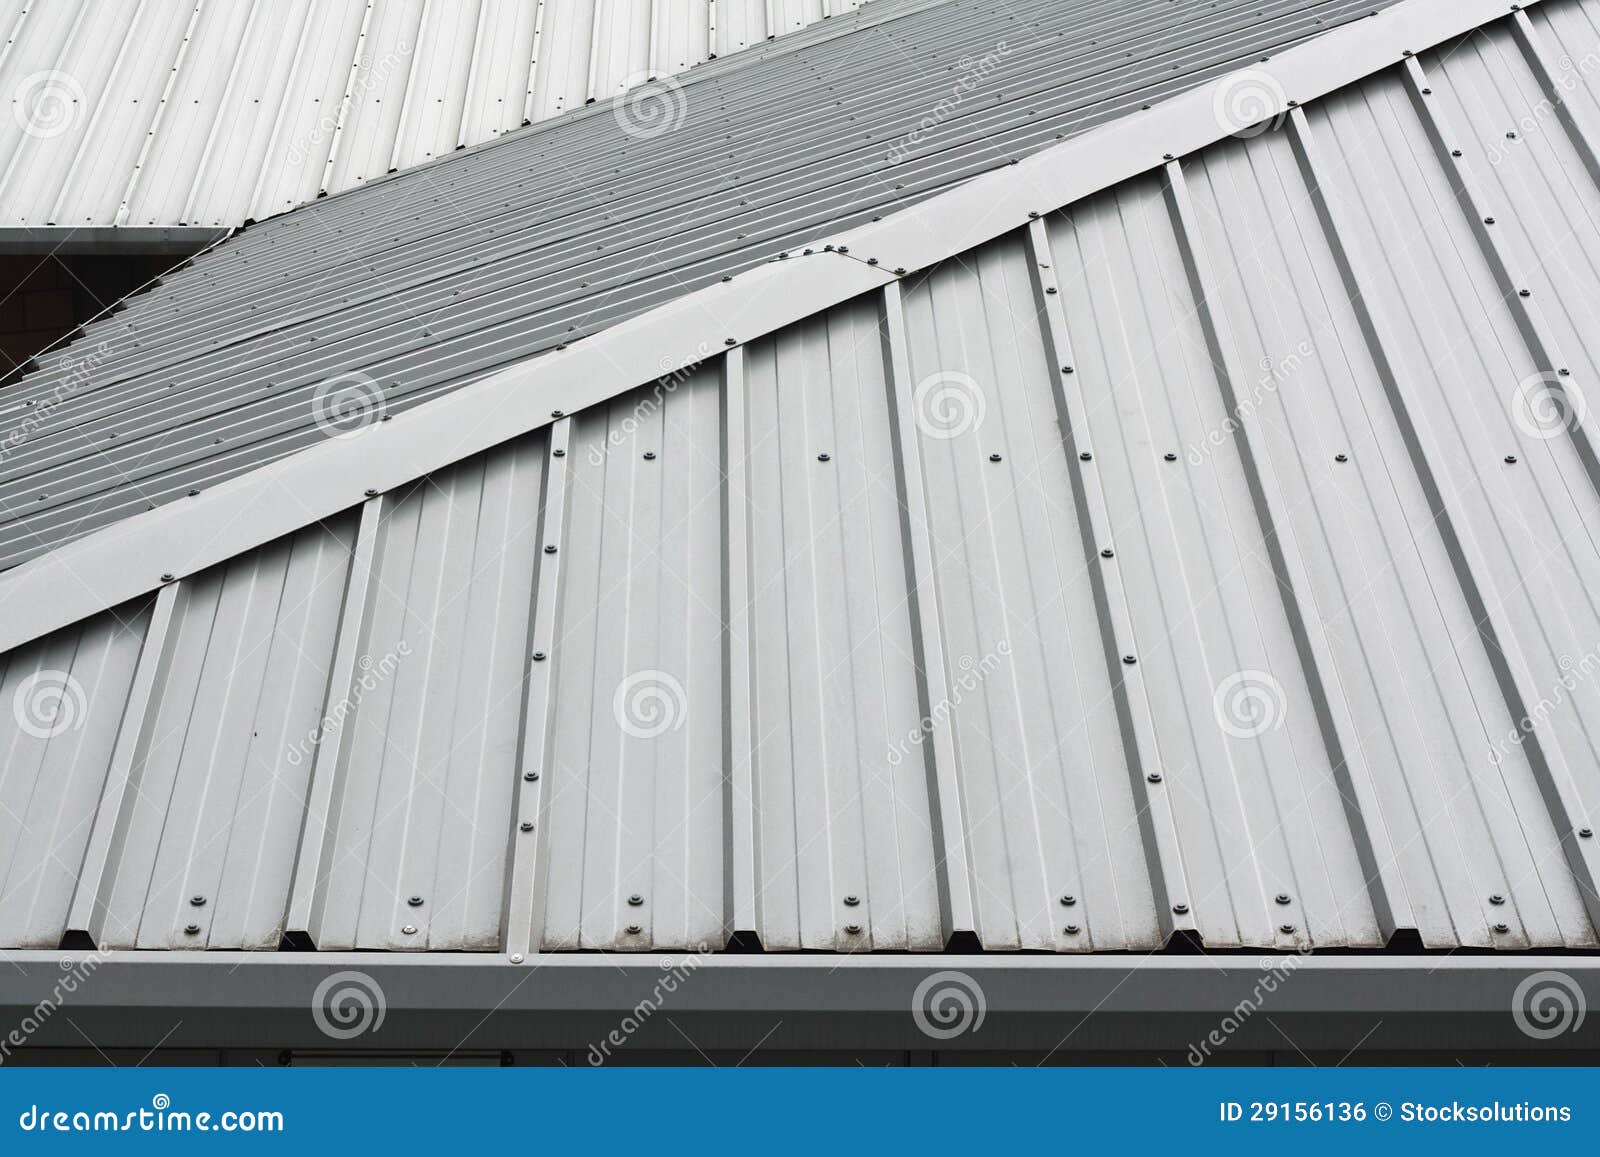 metal roof background